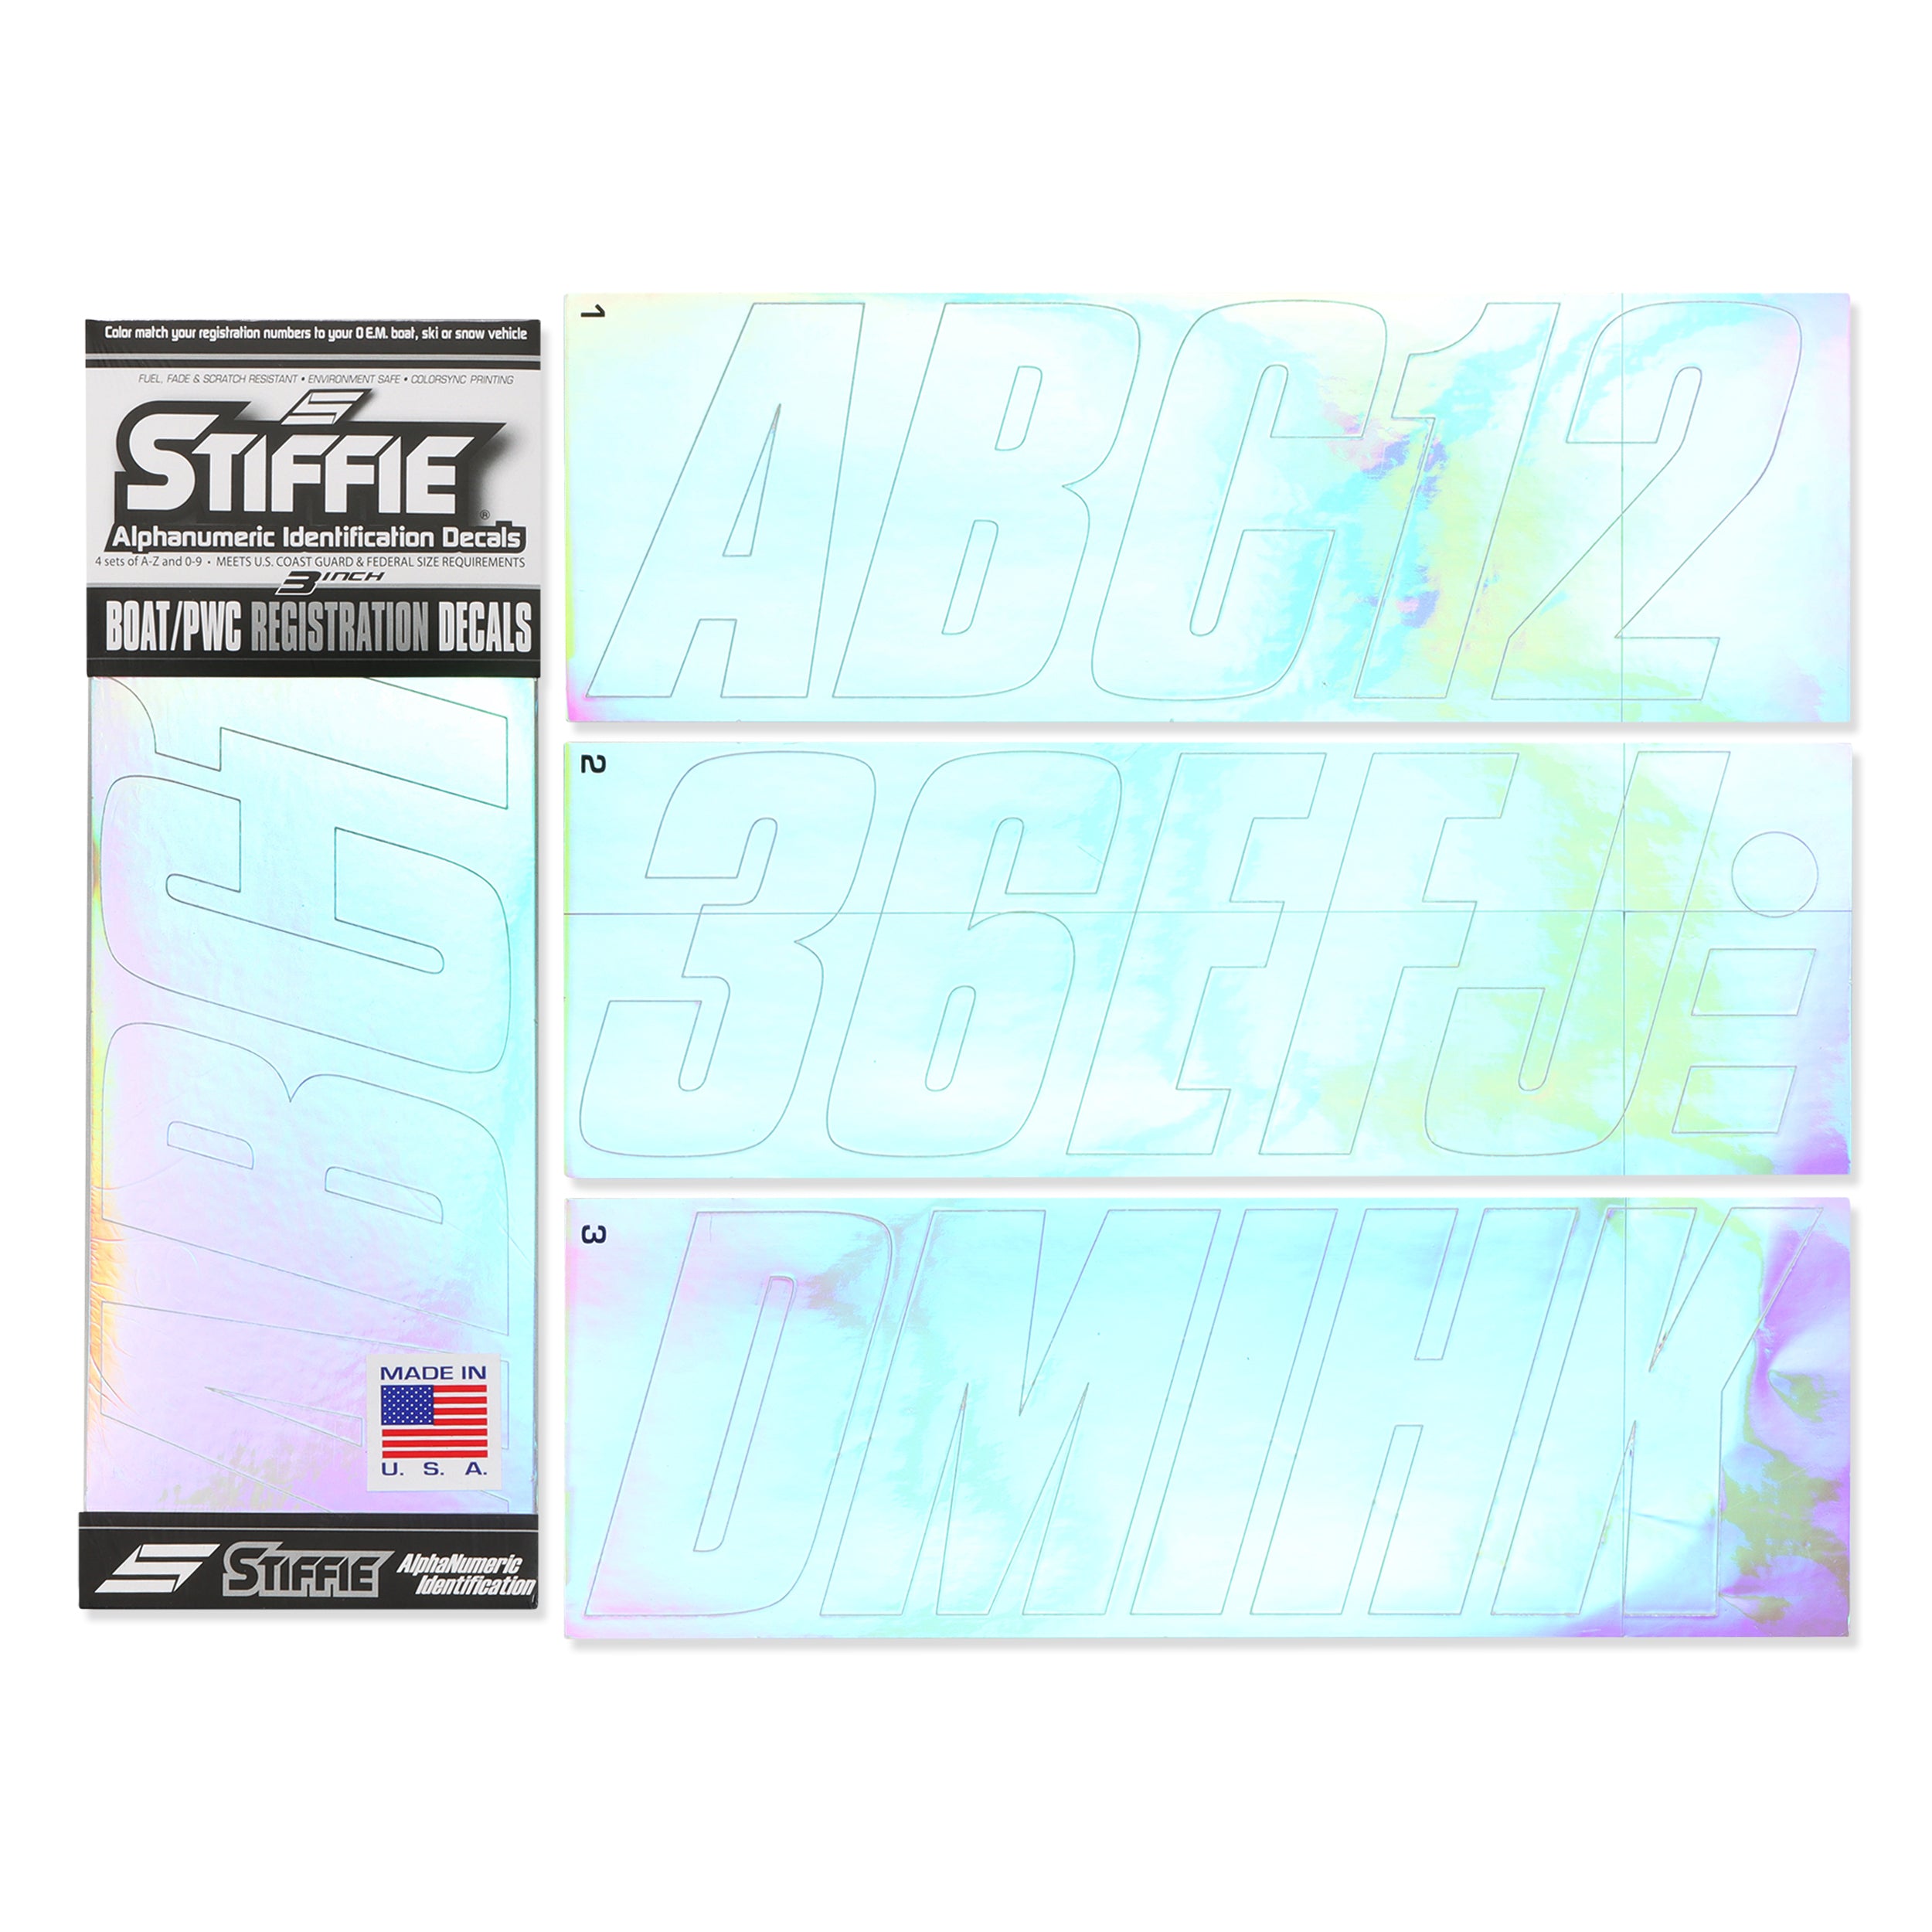 STIFFIE Shift Chrome 3" ID Kit Alpha-Numeric Registration Identification Numbers Stickers Decals for Boats & Personal Watercraft